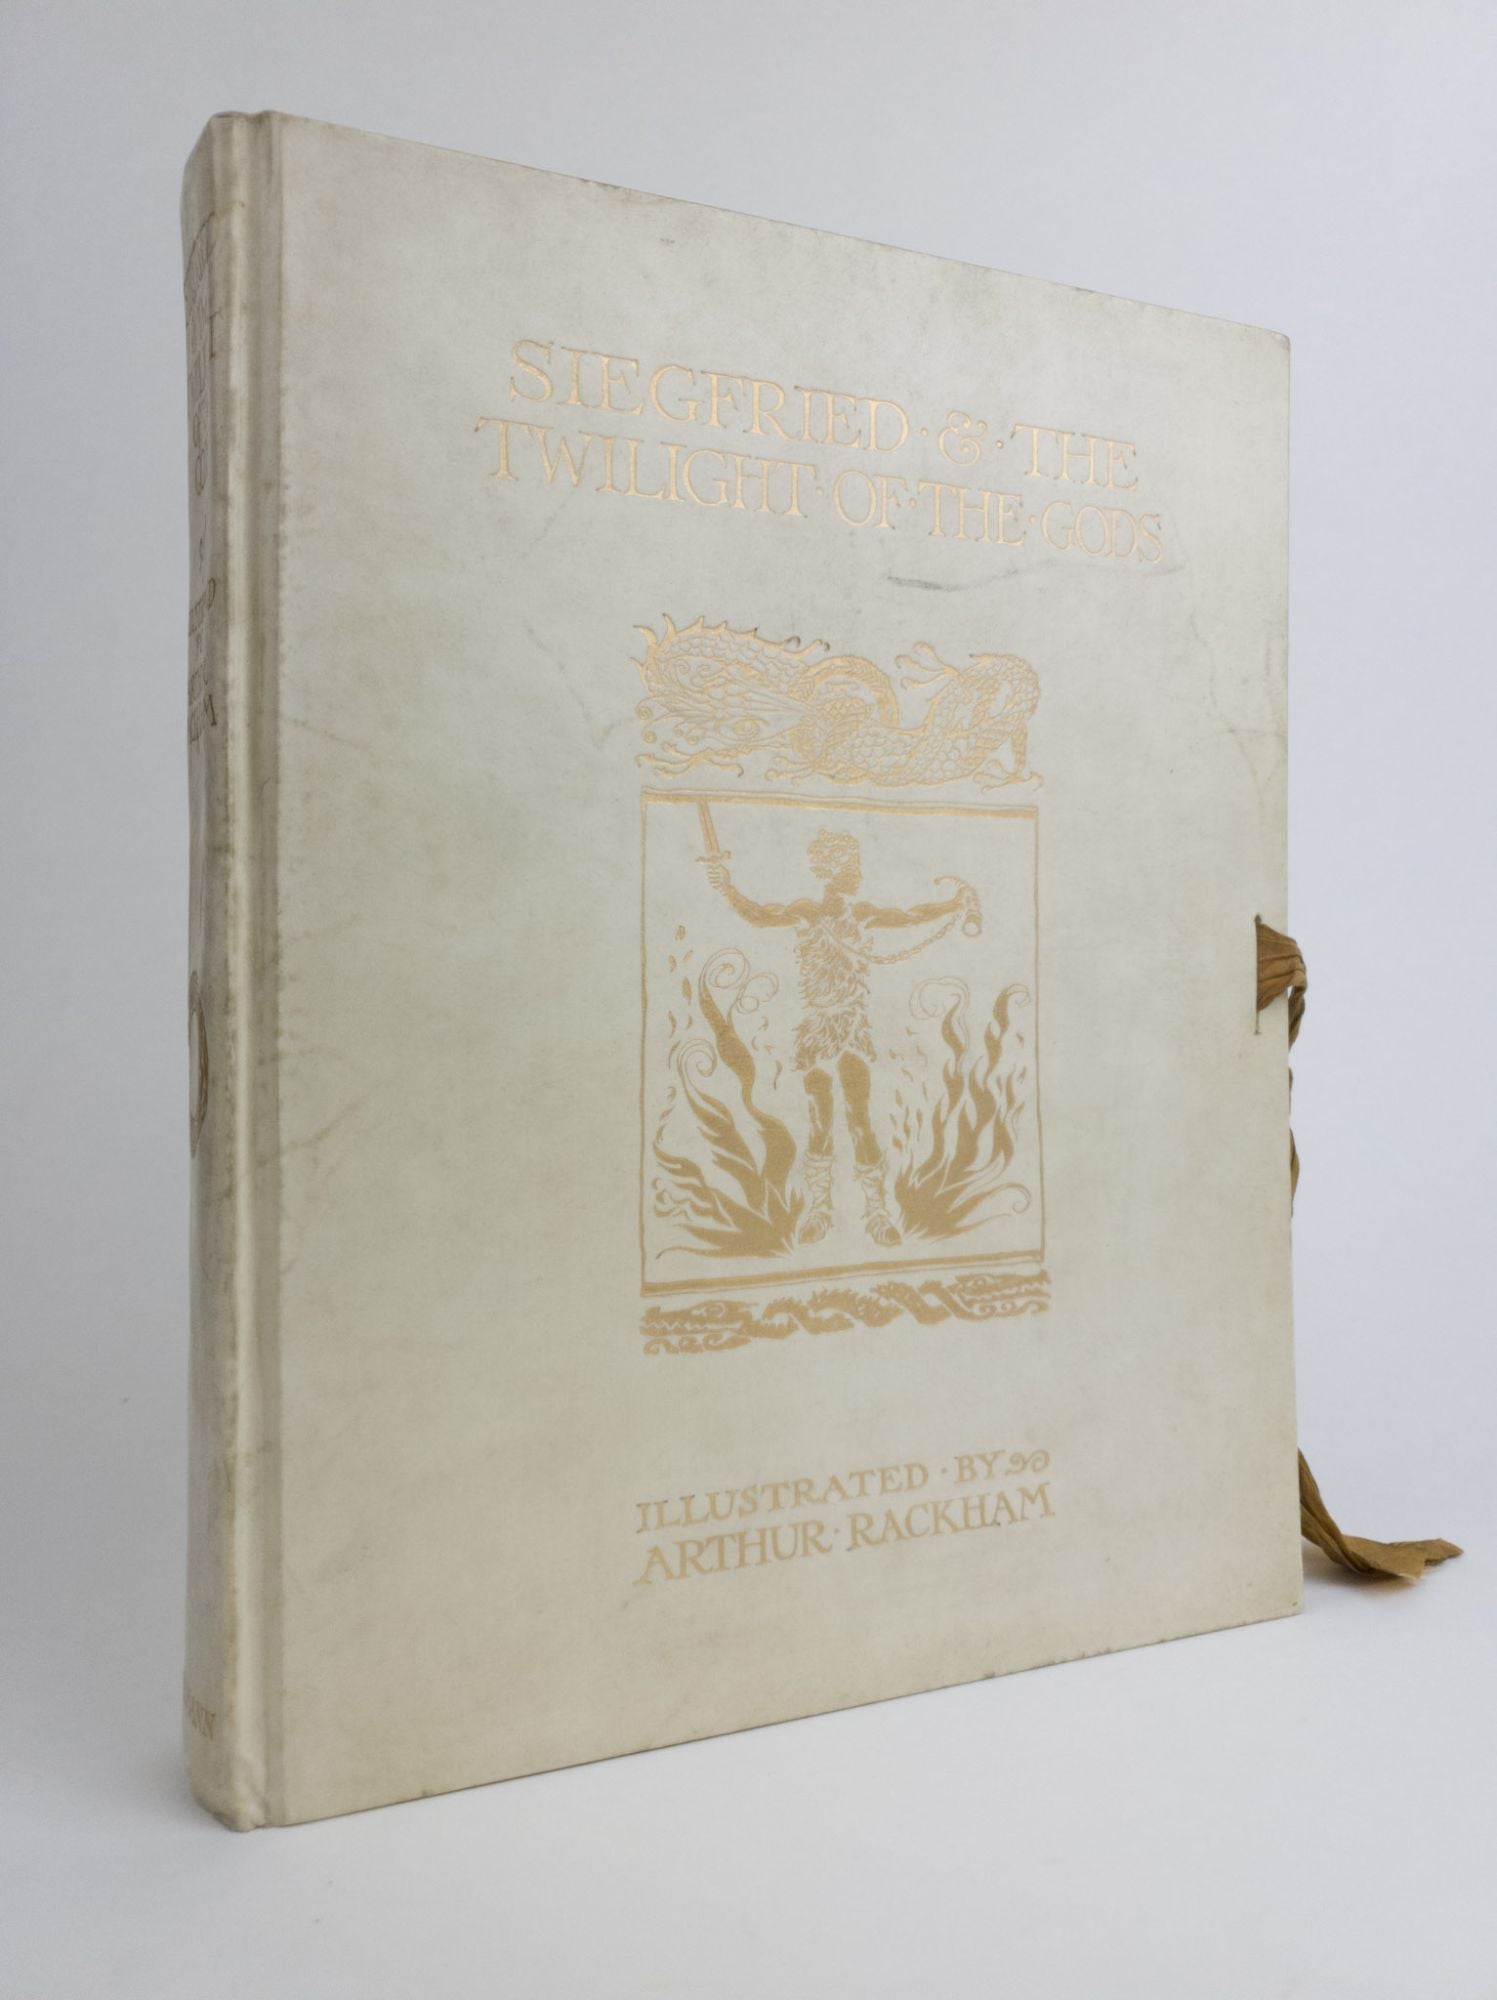 Product Image for SIEGFRIED & THE TWILIGHT OF THE GODS [Signed]